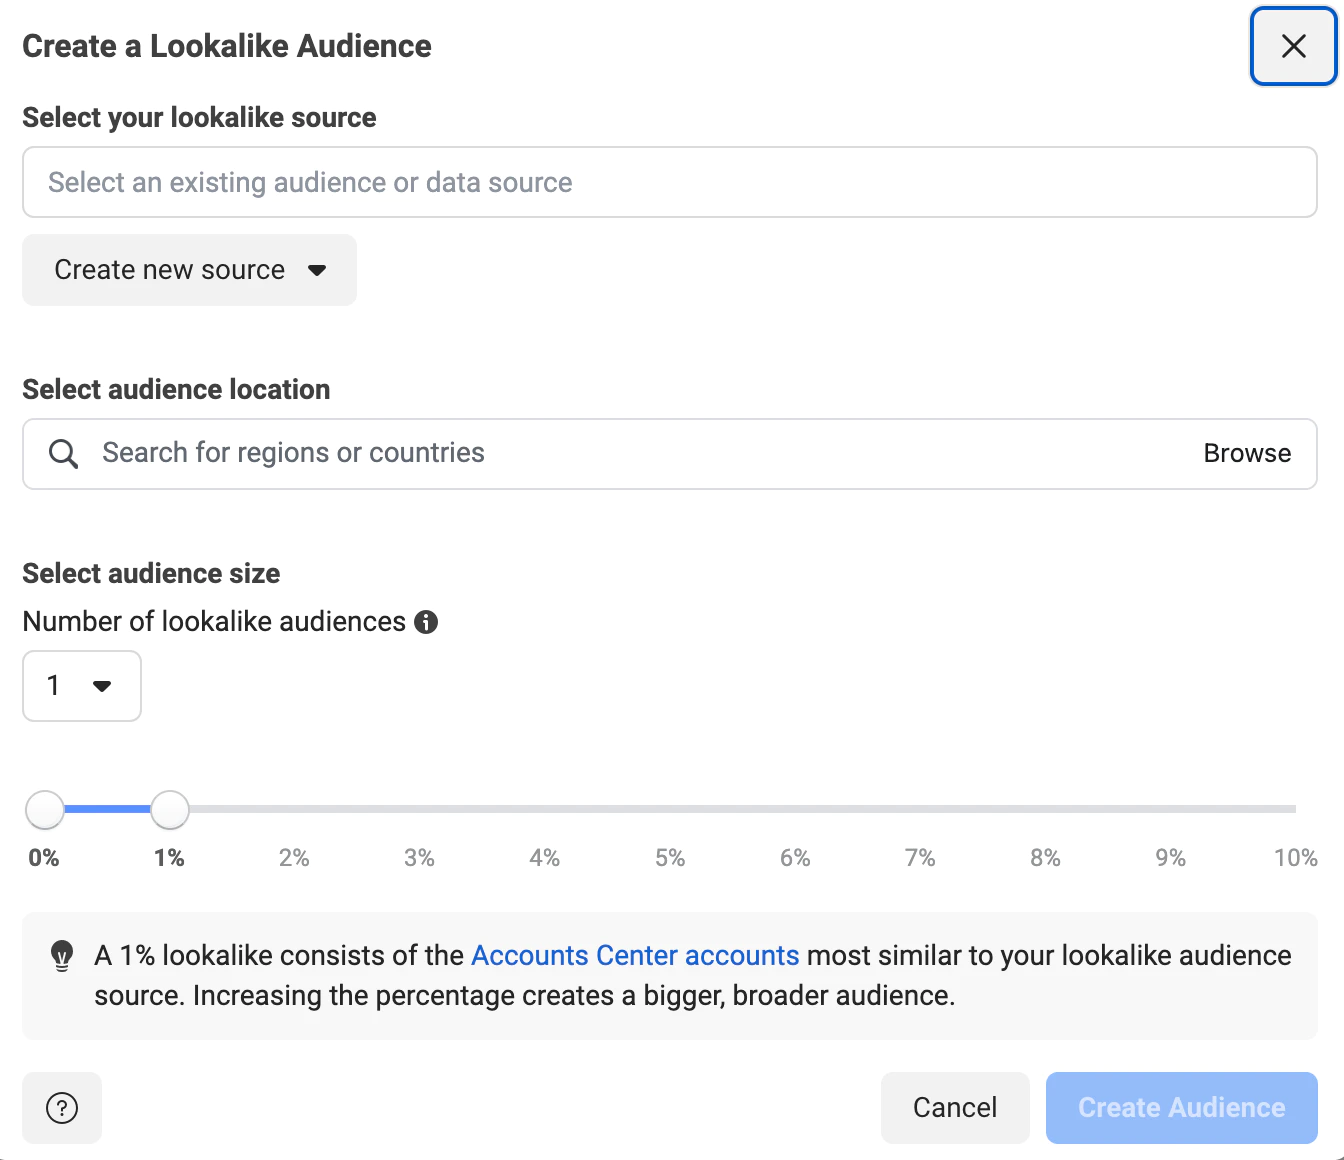 Create a Lookalike Audience based on your existing customer data